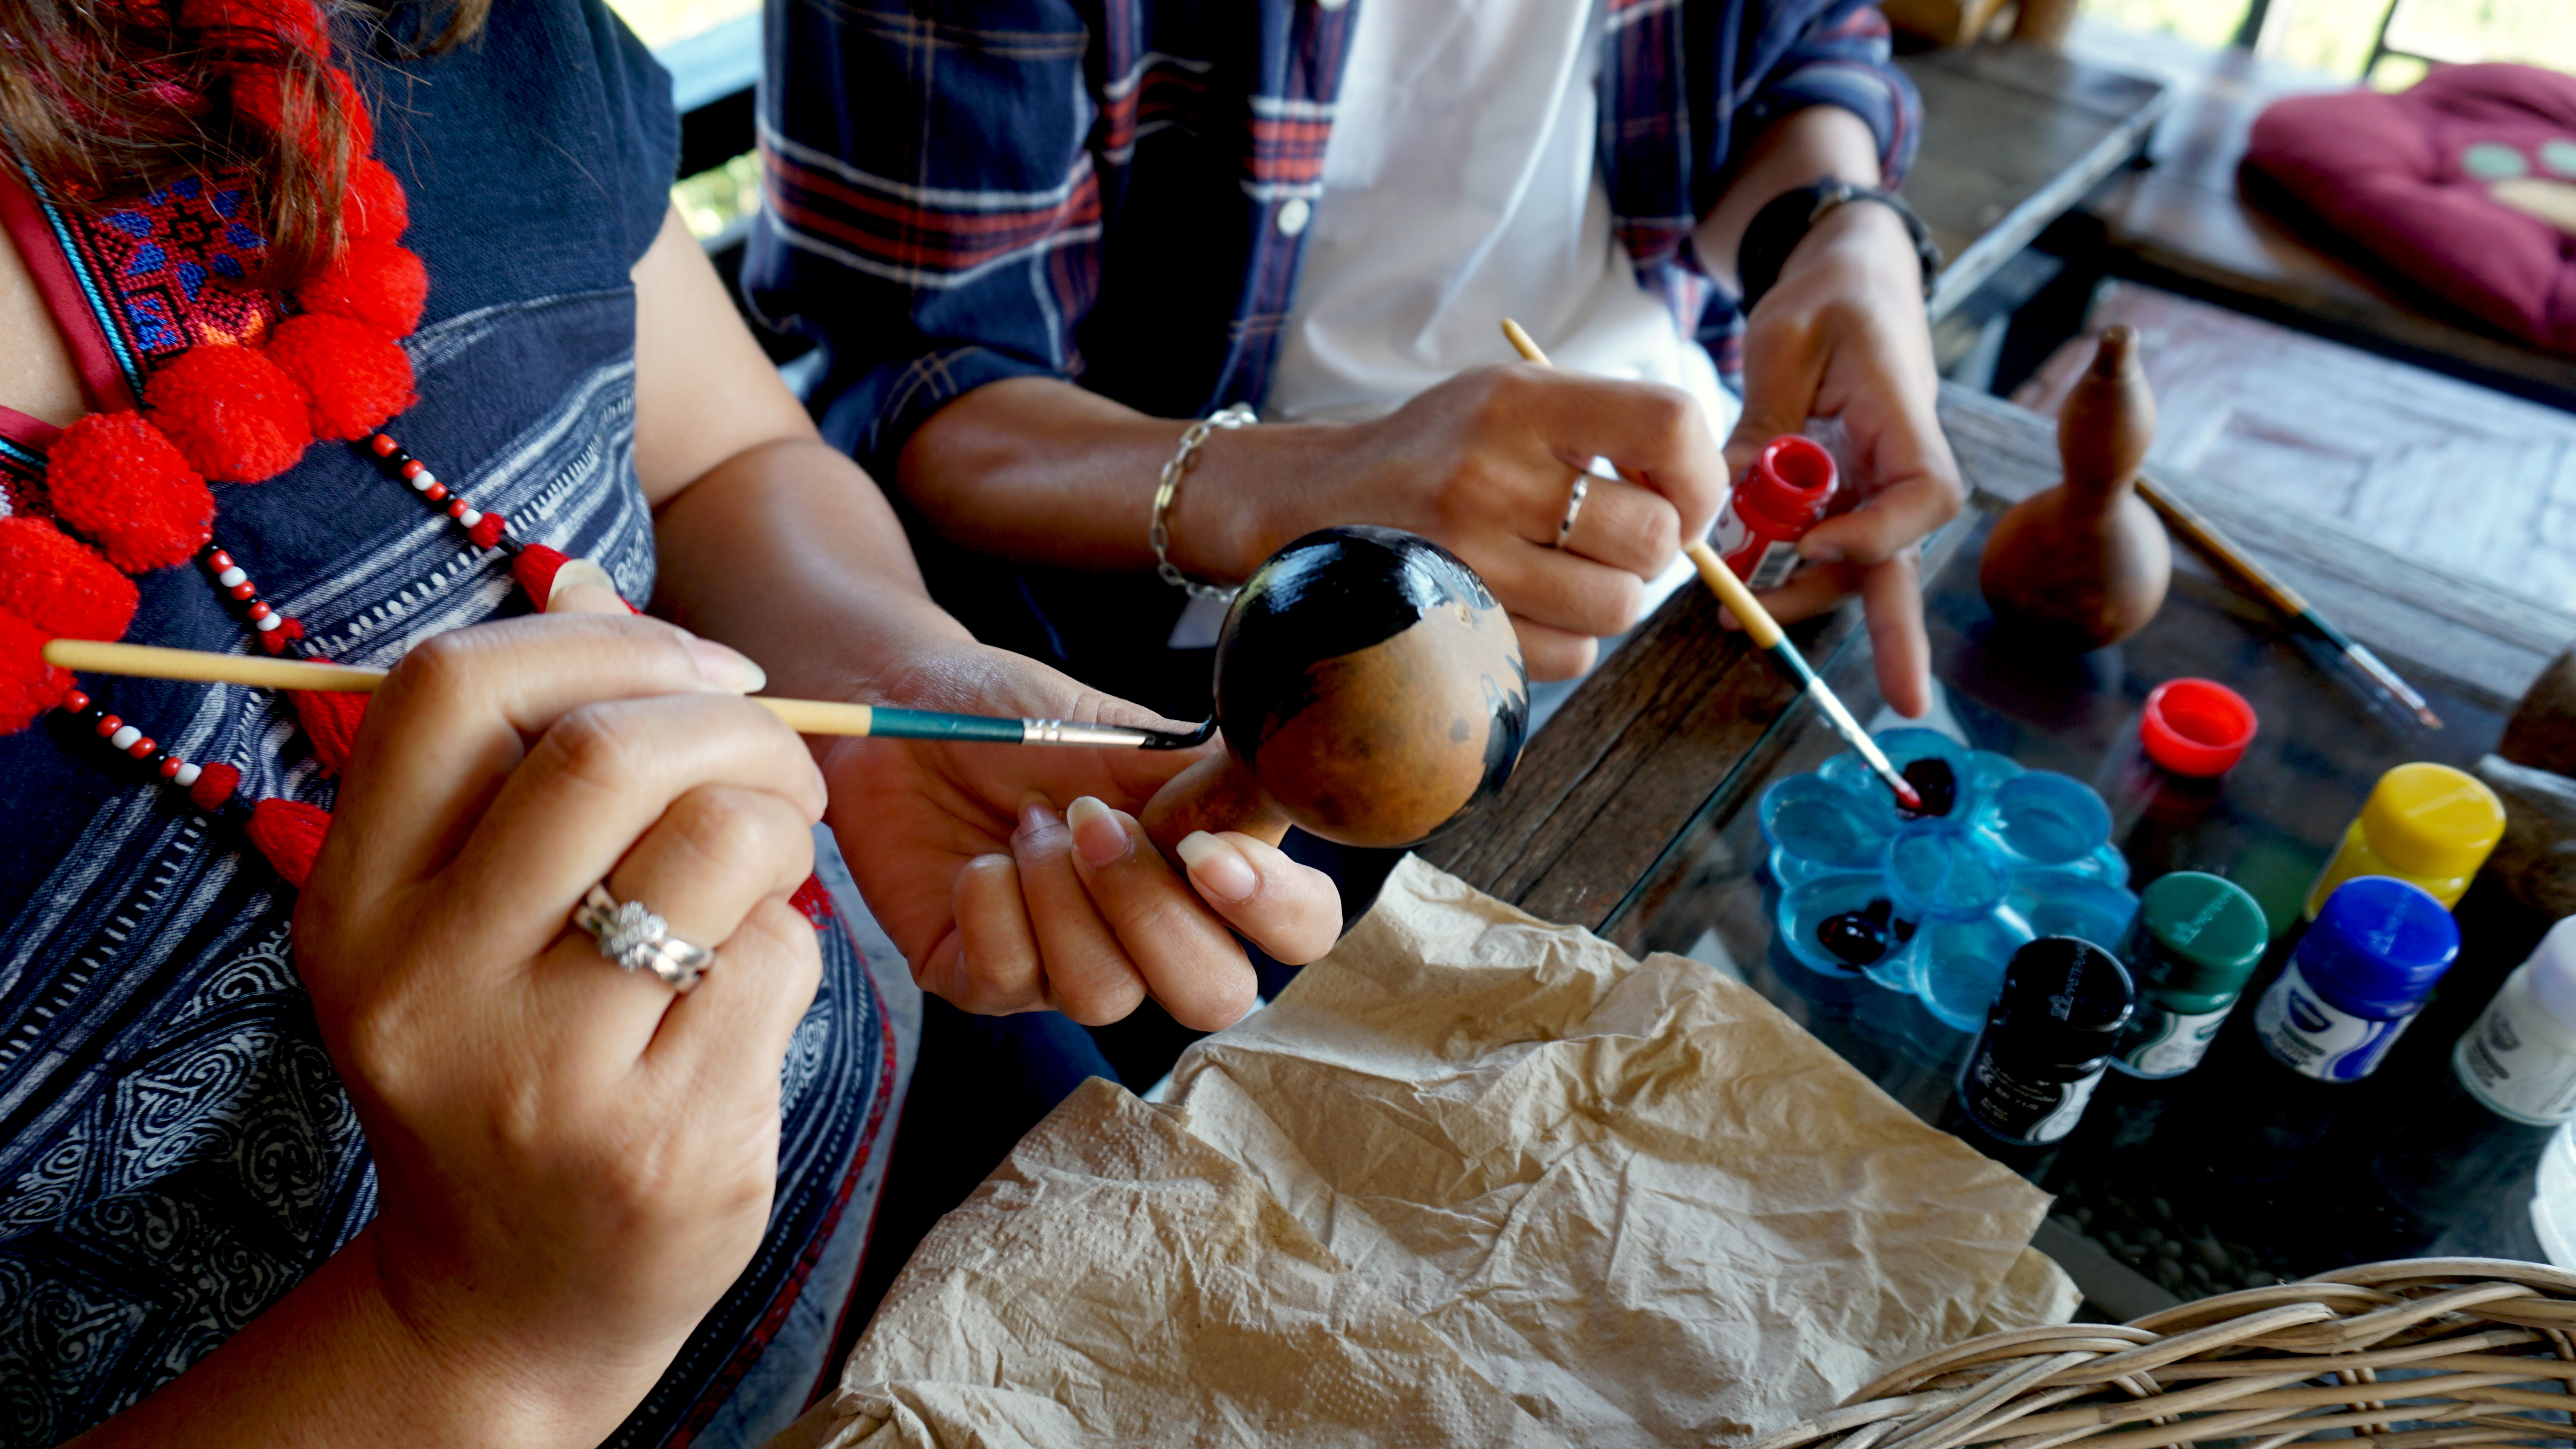 Aside from enjoying coffee and Pha Mee’s natural beauty, visitors can also take part in activities like painting of gourds, which are smaller versions of ones that were once used by villagers as water vessels.